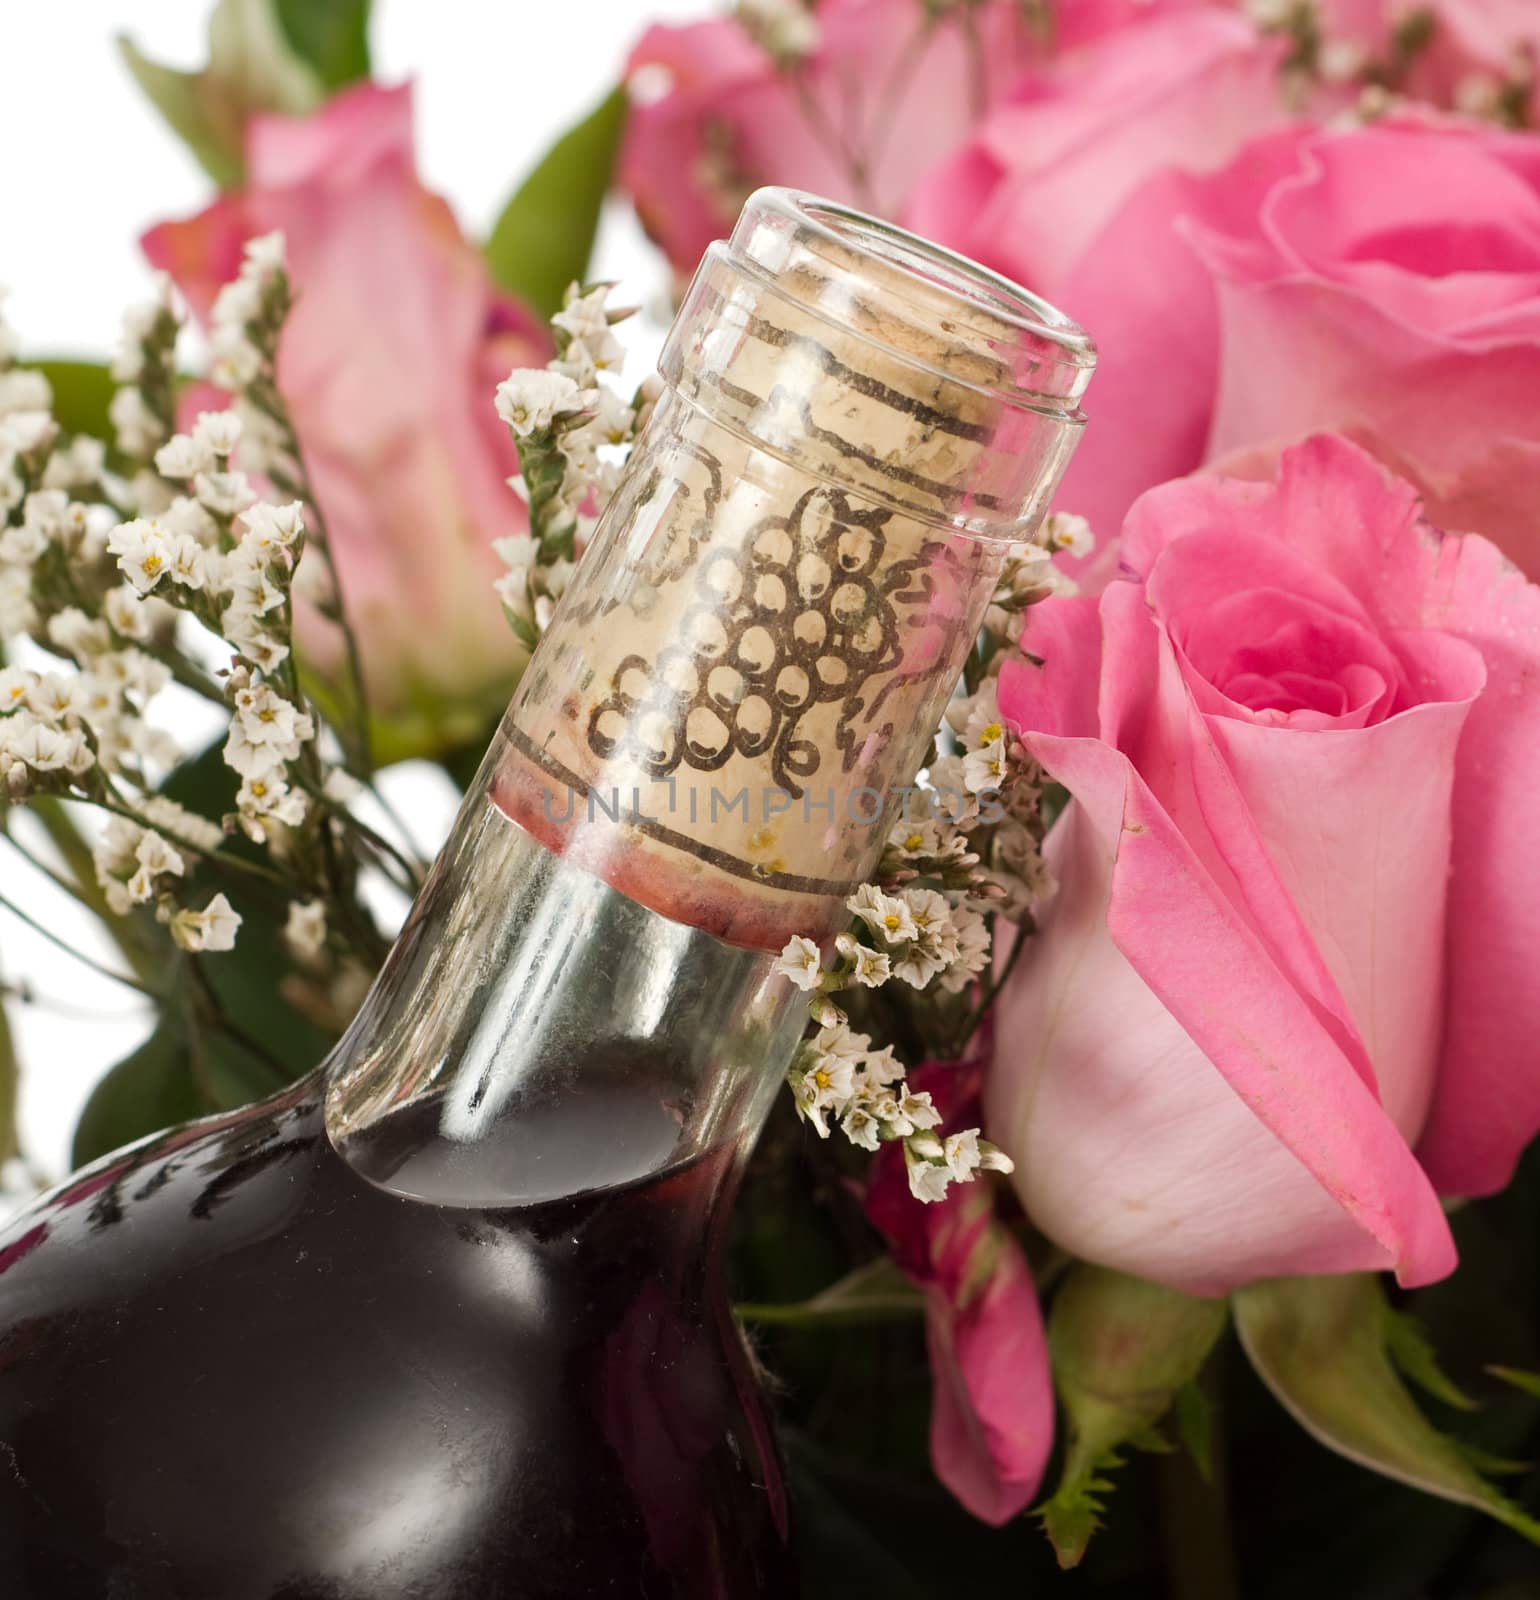 Closeup view of a corked bottle of champagne and some pink roses